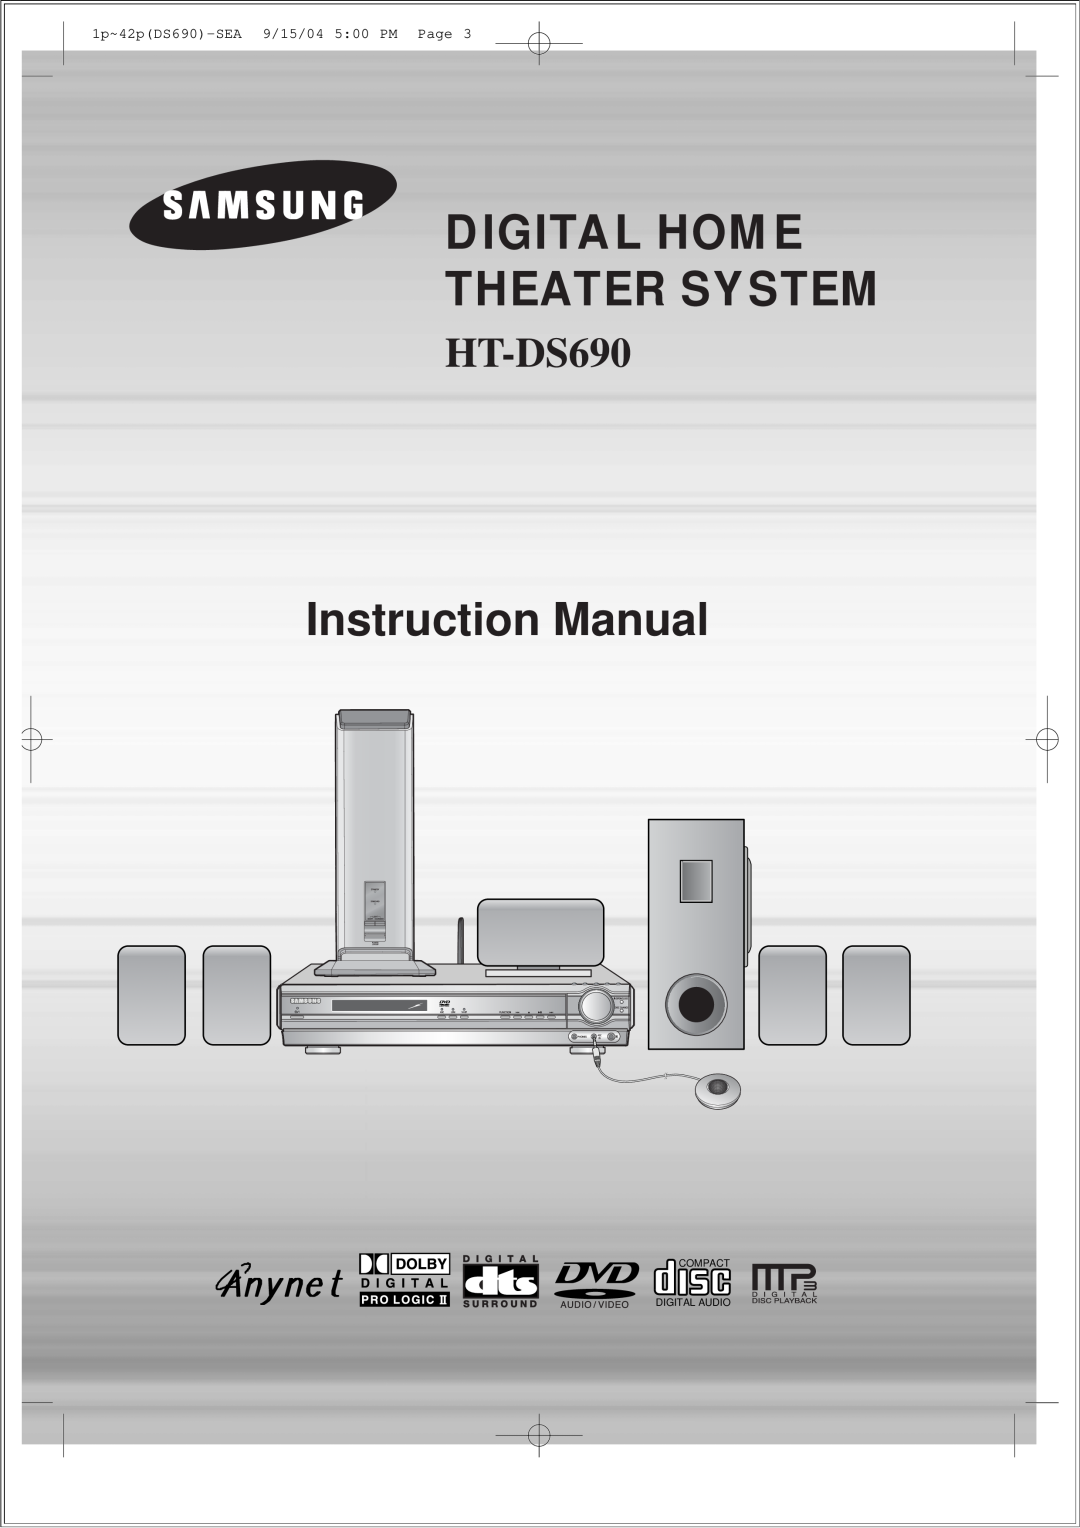 Samsung HT-DS690 instruction manual Digital Home Theater System, Instruction Manual, 1p~42pDS690-SEA9/15/04 5:00 PM Page 